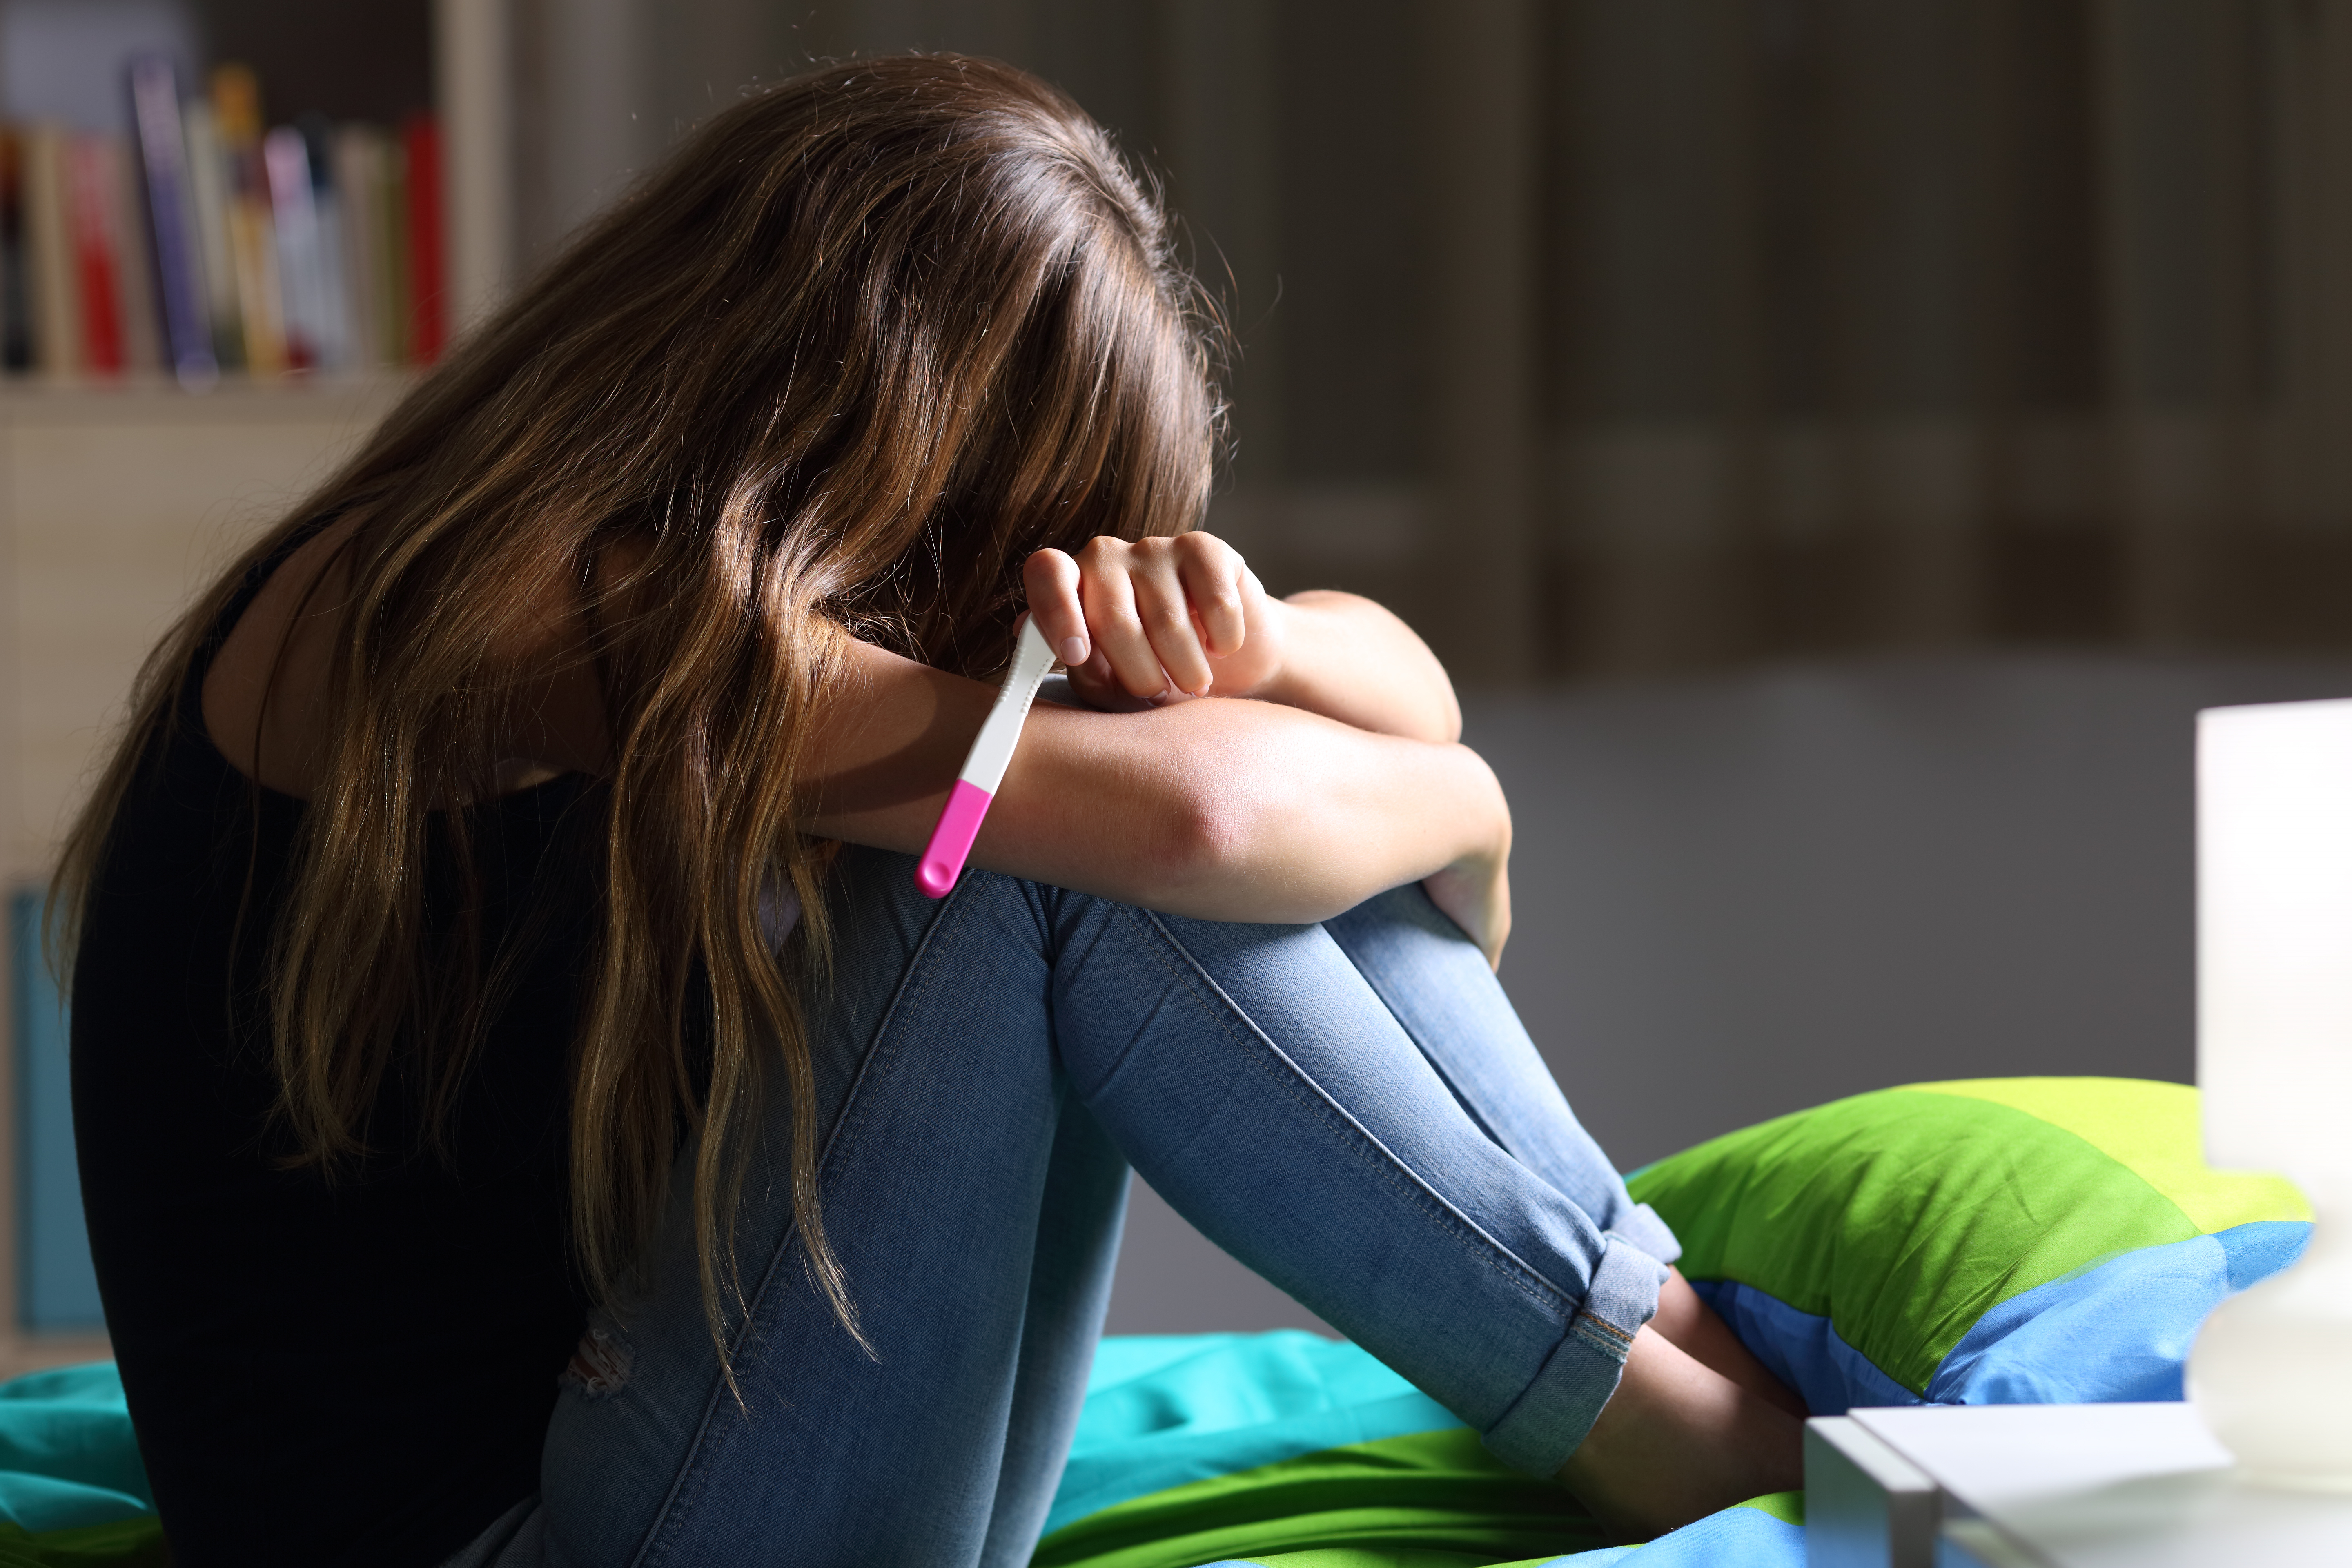 A teen girl crying over a positive pregnancy test | Source: Shutterstock